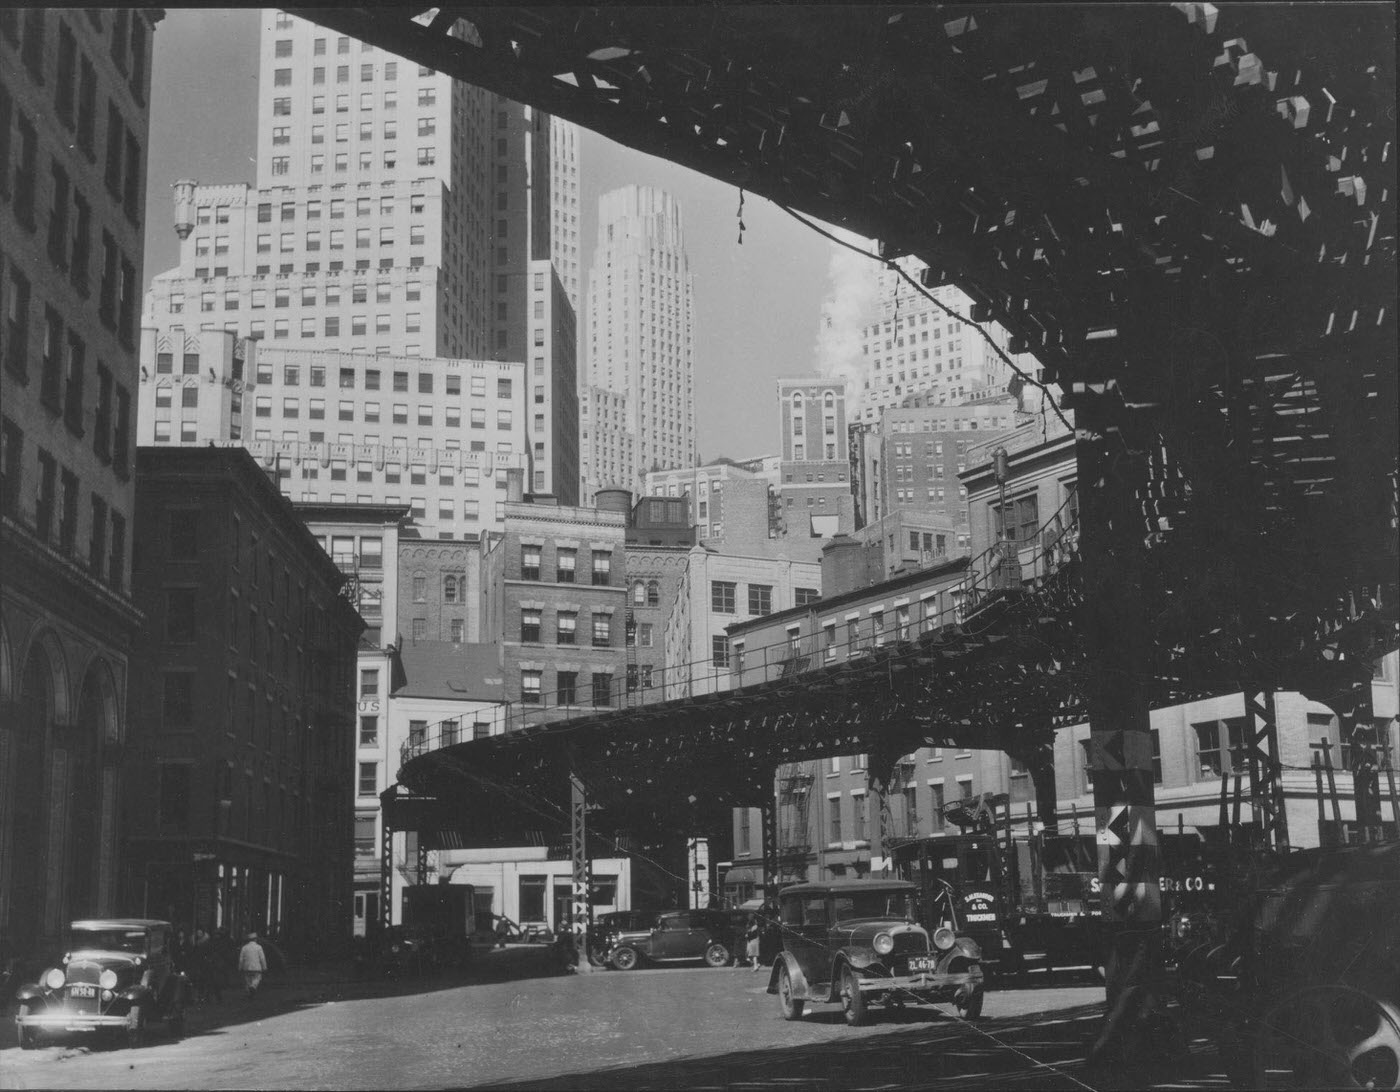 Elevated Train, Looking East On South Street, New York City, 1929.